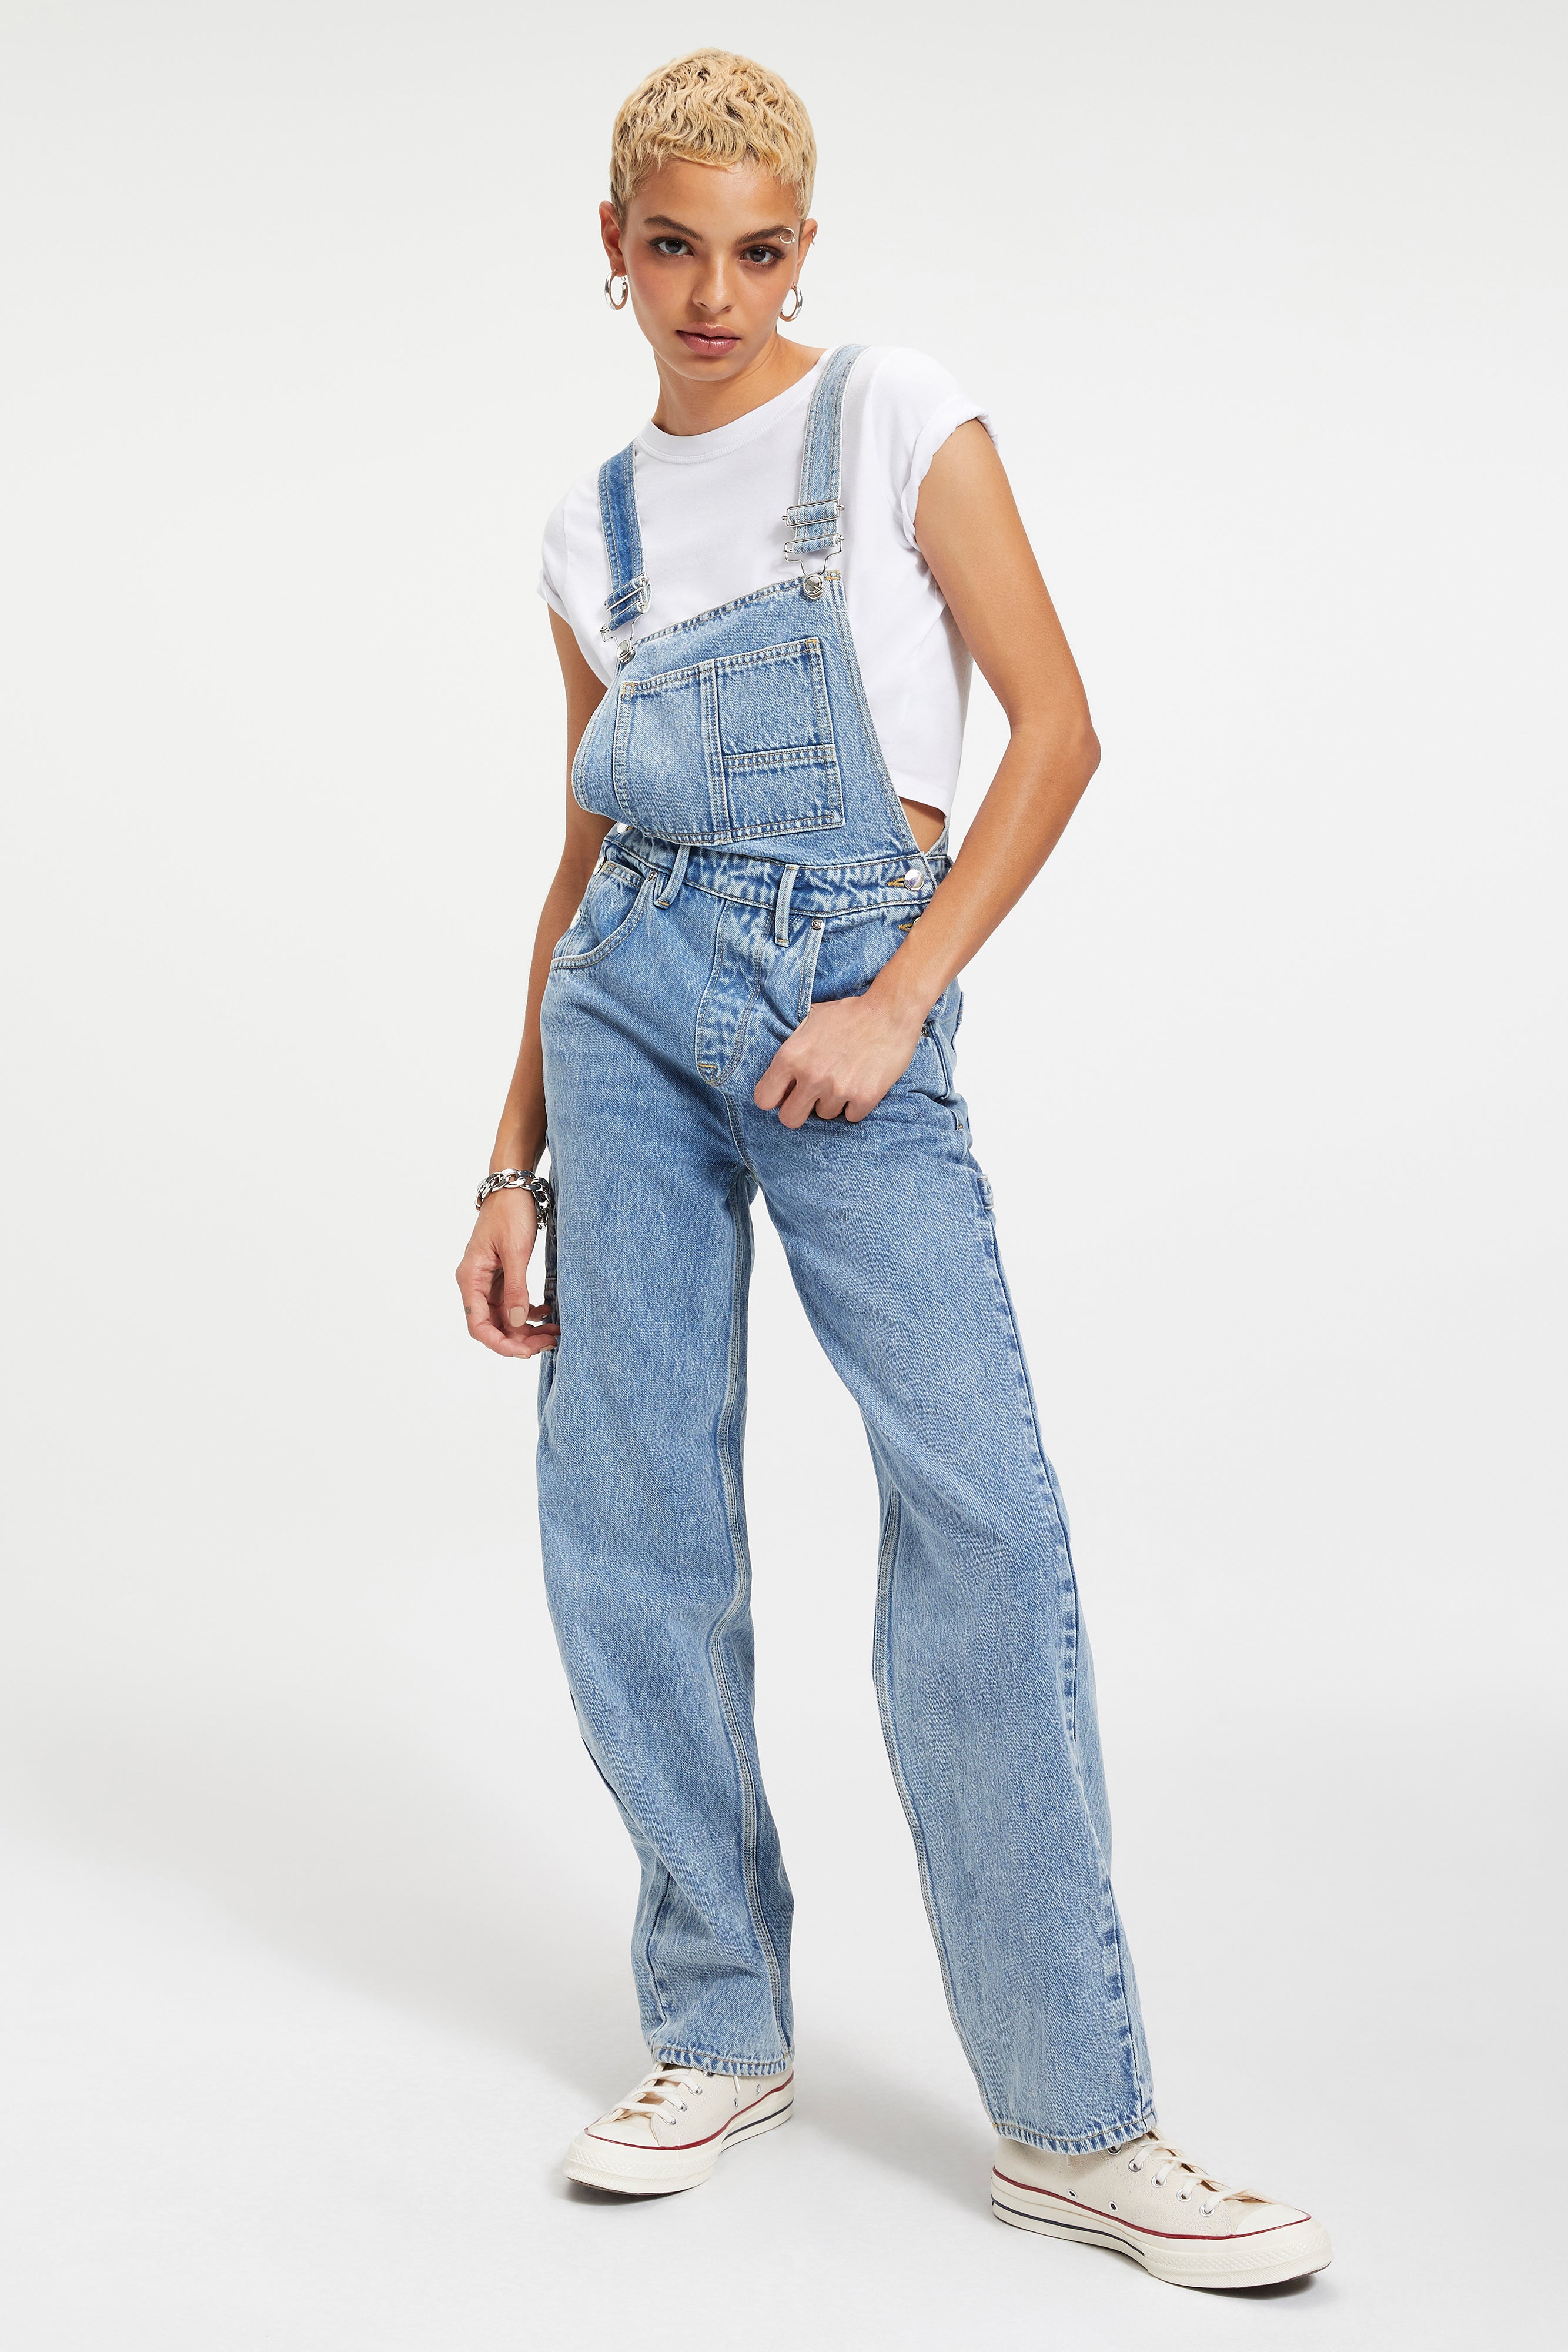 The Best Women's Dungarees Making a Stylish Comeback | Who What Wear